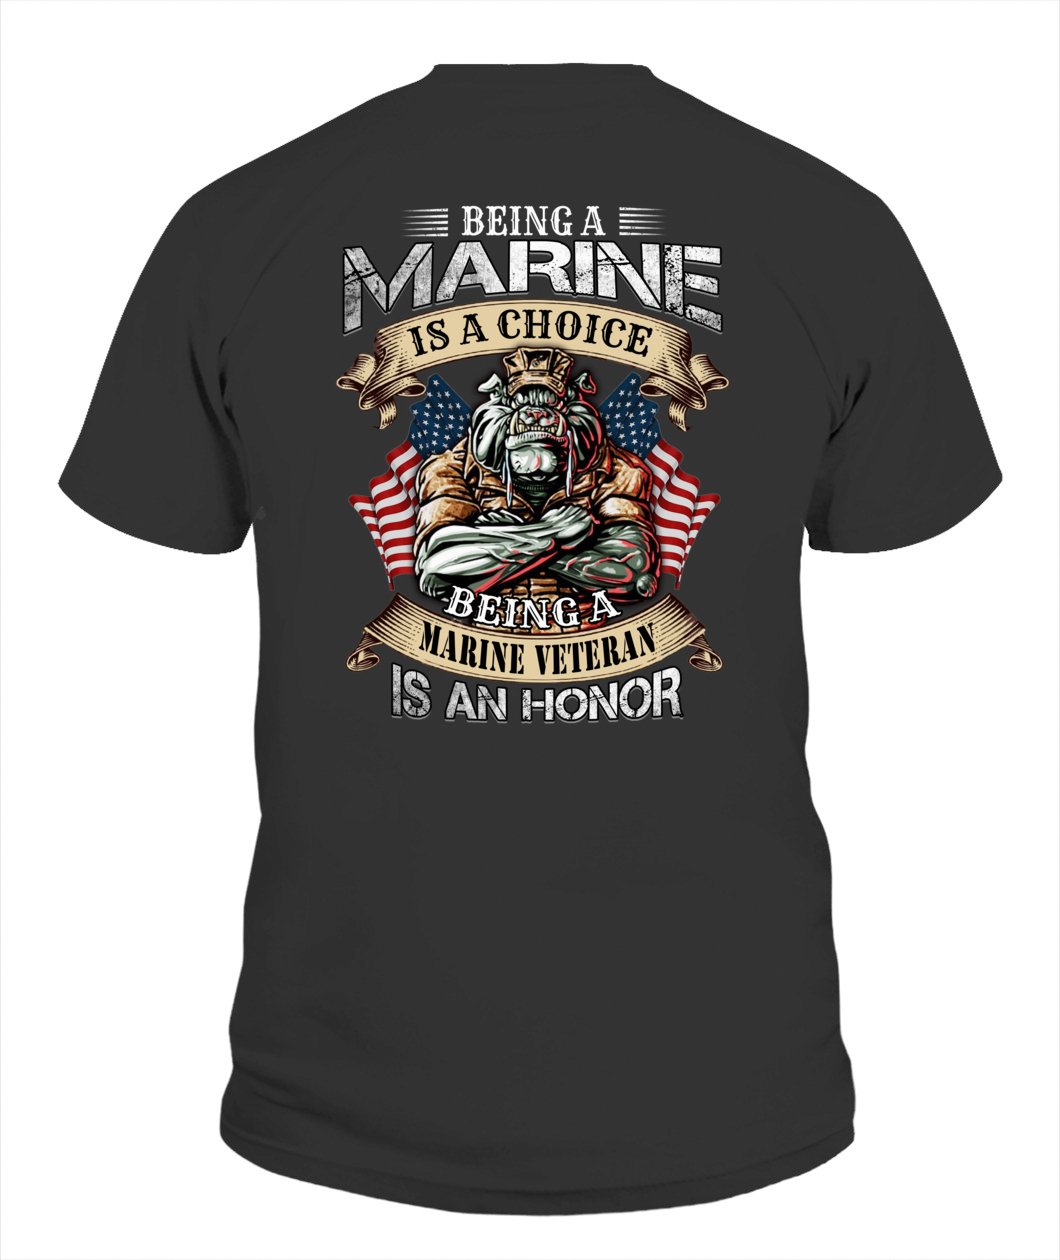 Being A Marine Is A Choice Veteran Unisex T Shirt | Full Size | Adult | Black | K29121